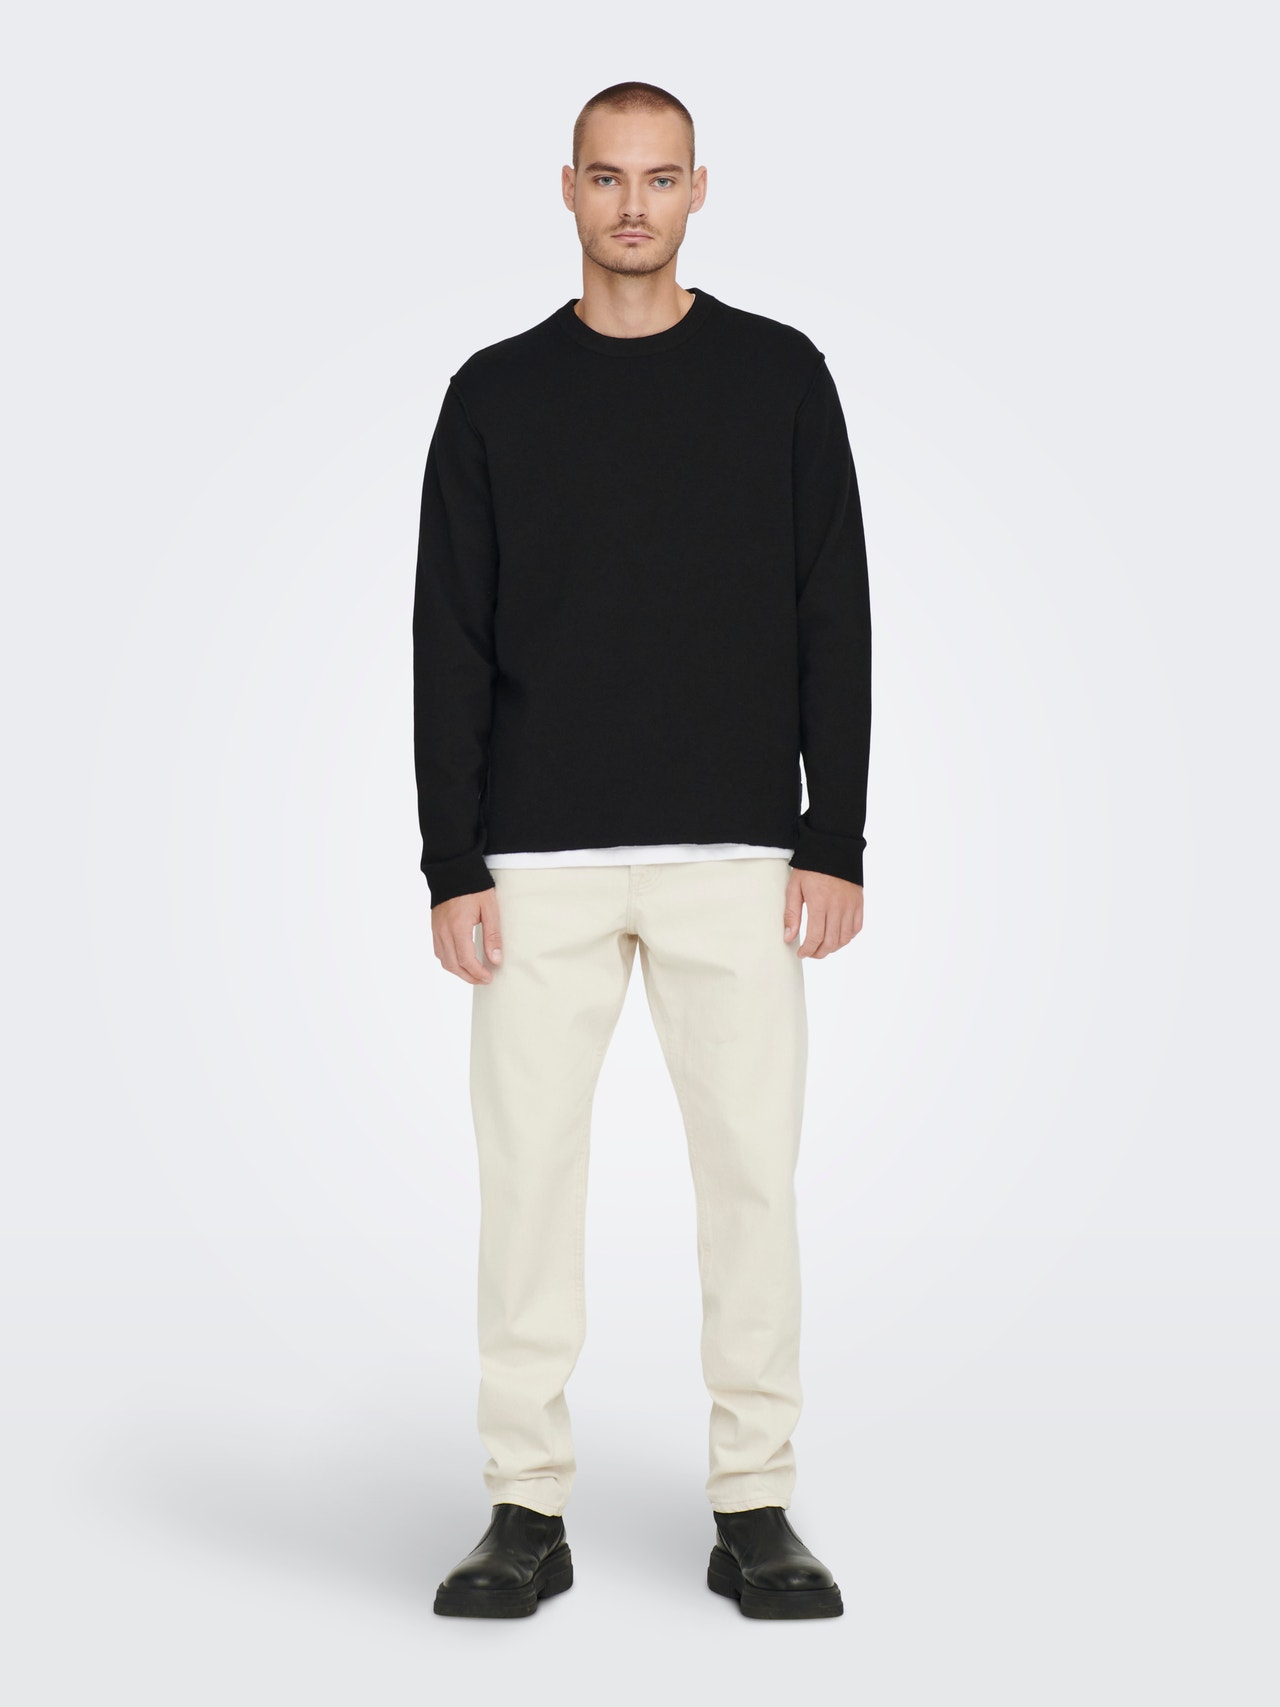 ONLY & SONS O-hals Pullover -Black - 22023200